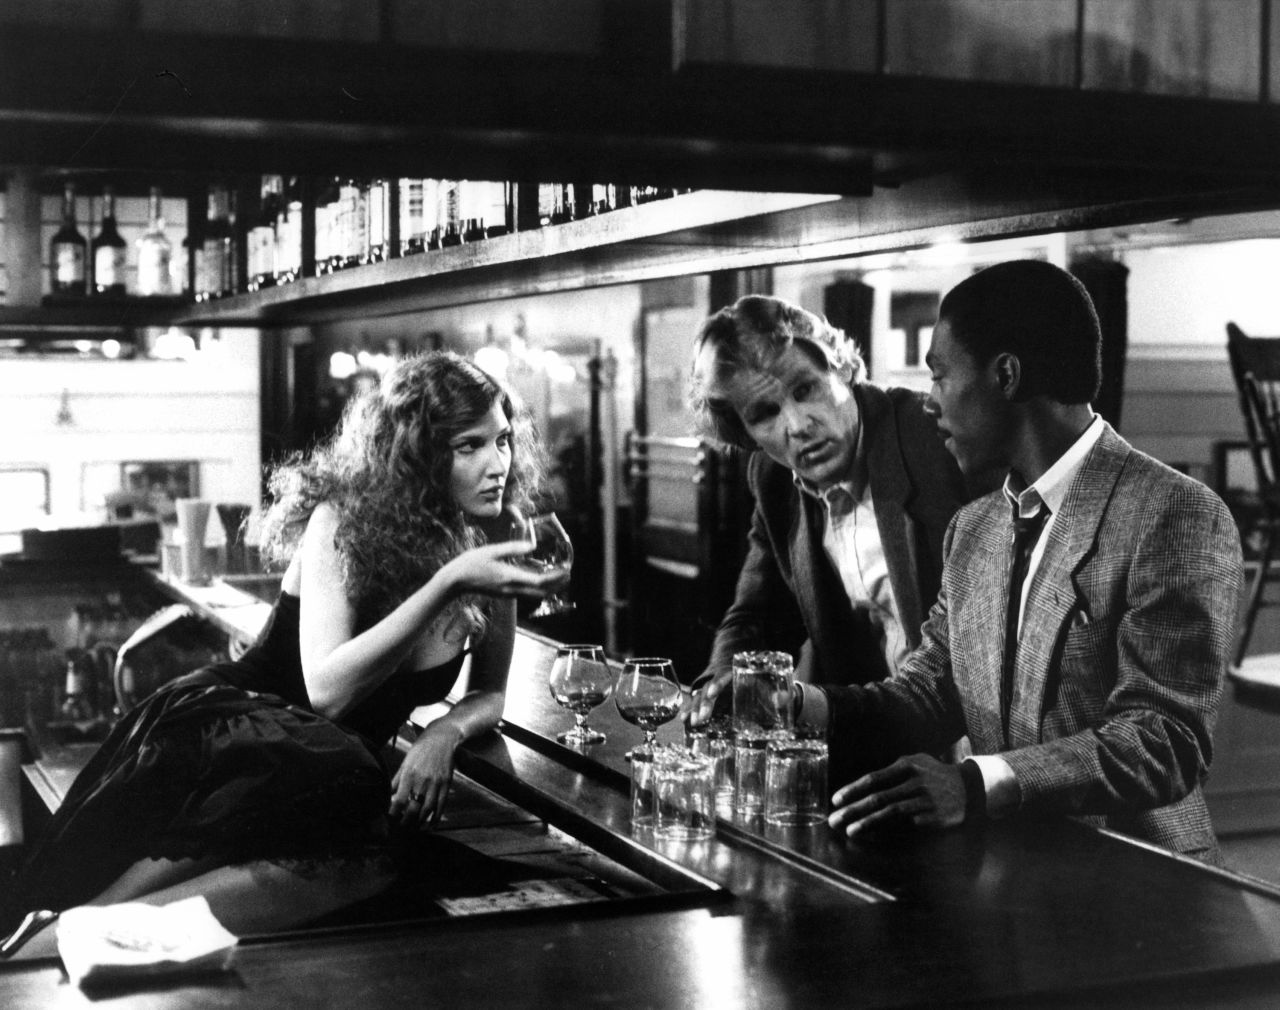 Murphy's first feature film was "48 Hrs." in 1982. Here, he appears in a scene with Nick Nolte and Annette O'Toole.